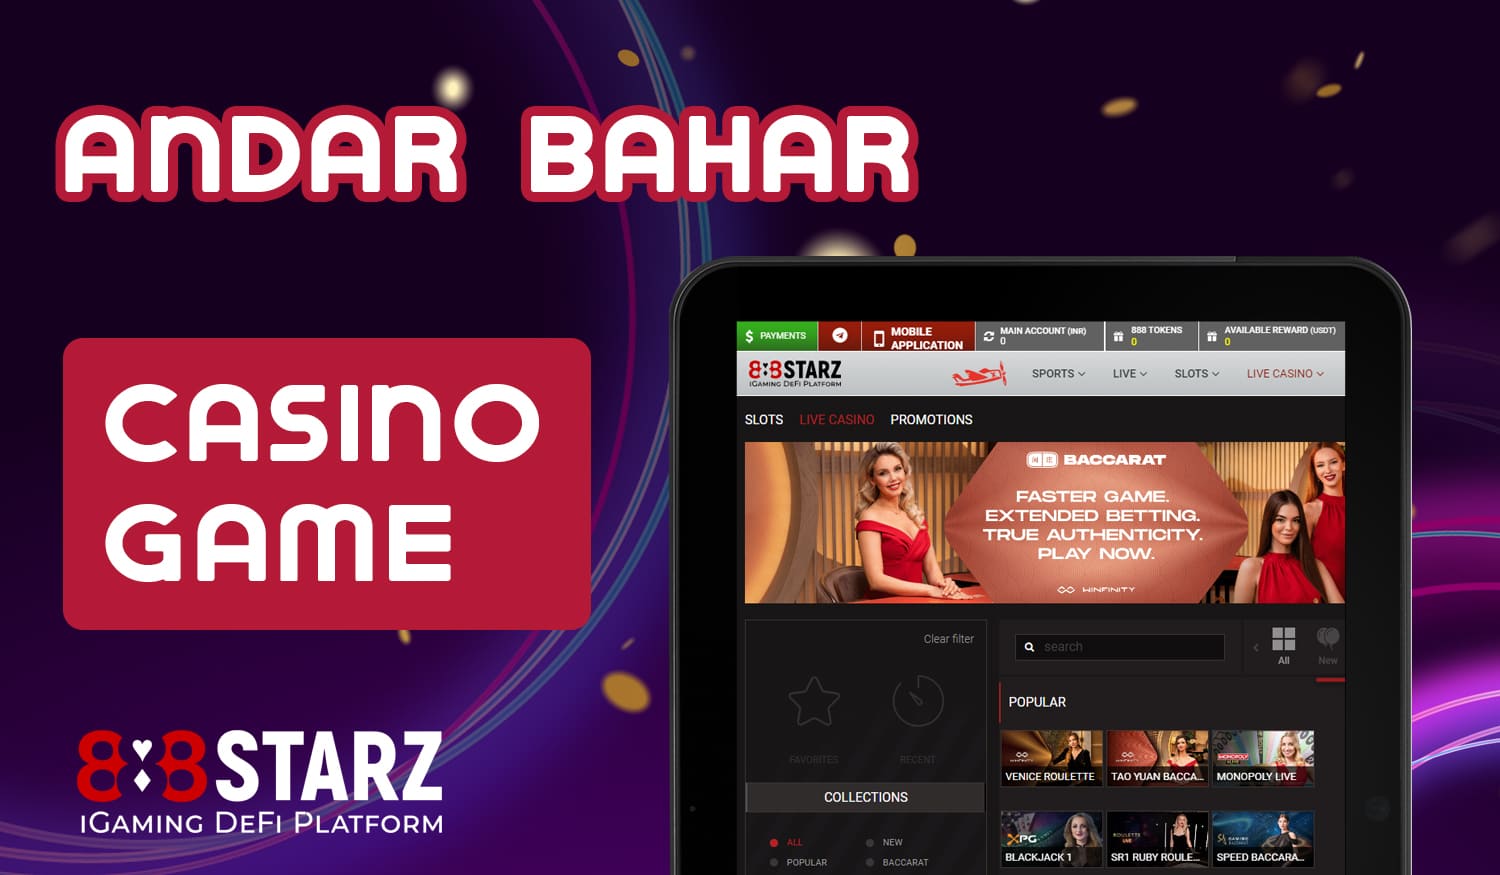 What games are available in the online casino section of 888Starz website